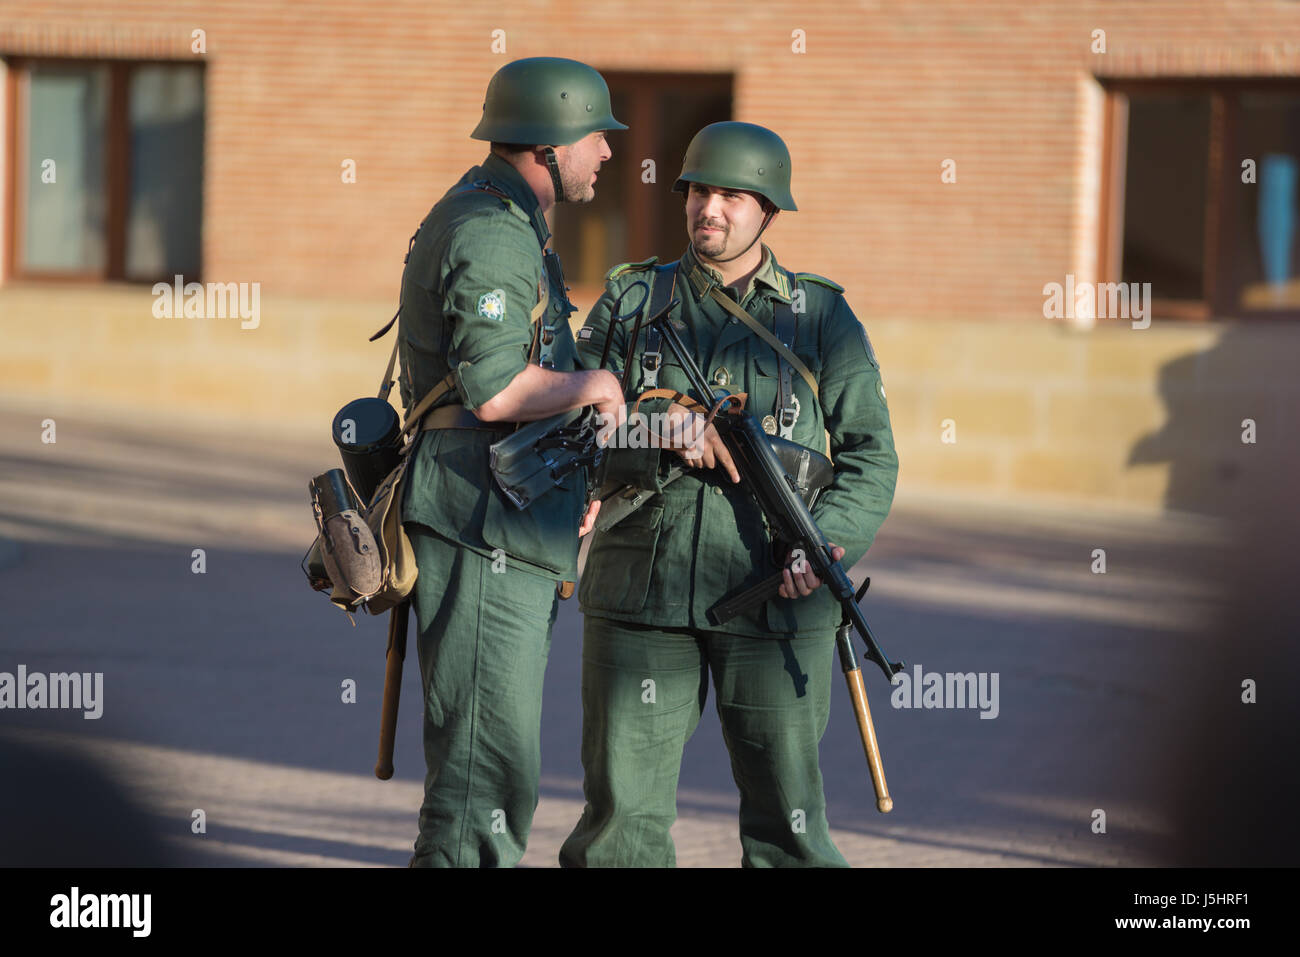 Belorado, Spain - May 6, 2017: German soldiers in World war 2 reenactment,  Military historical reconstruction of the battle of Salerno 1943, on May 6 Stock Photo